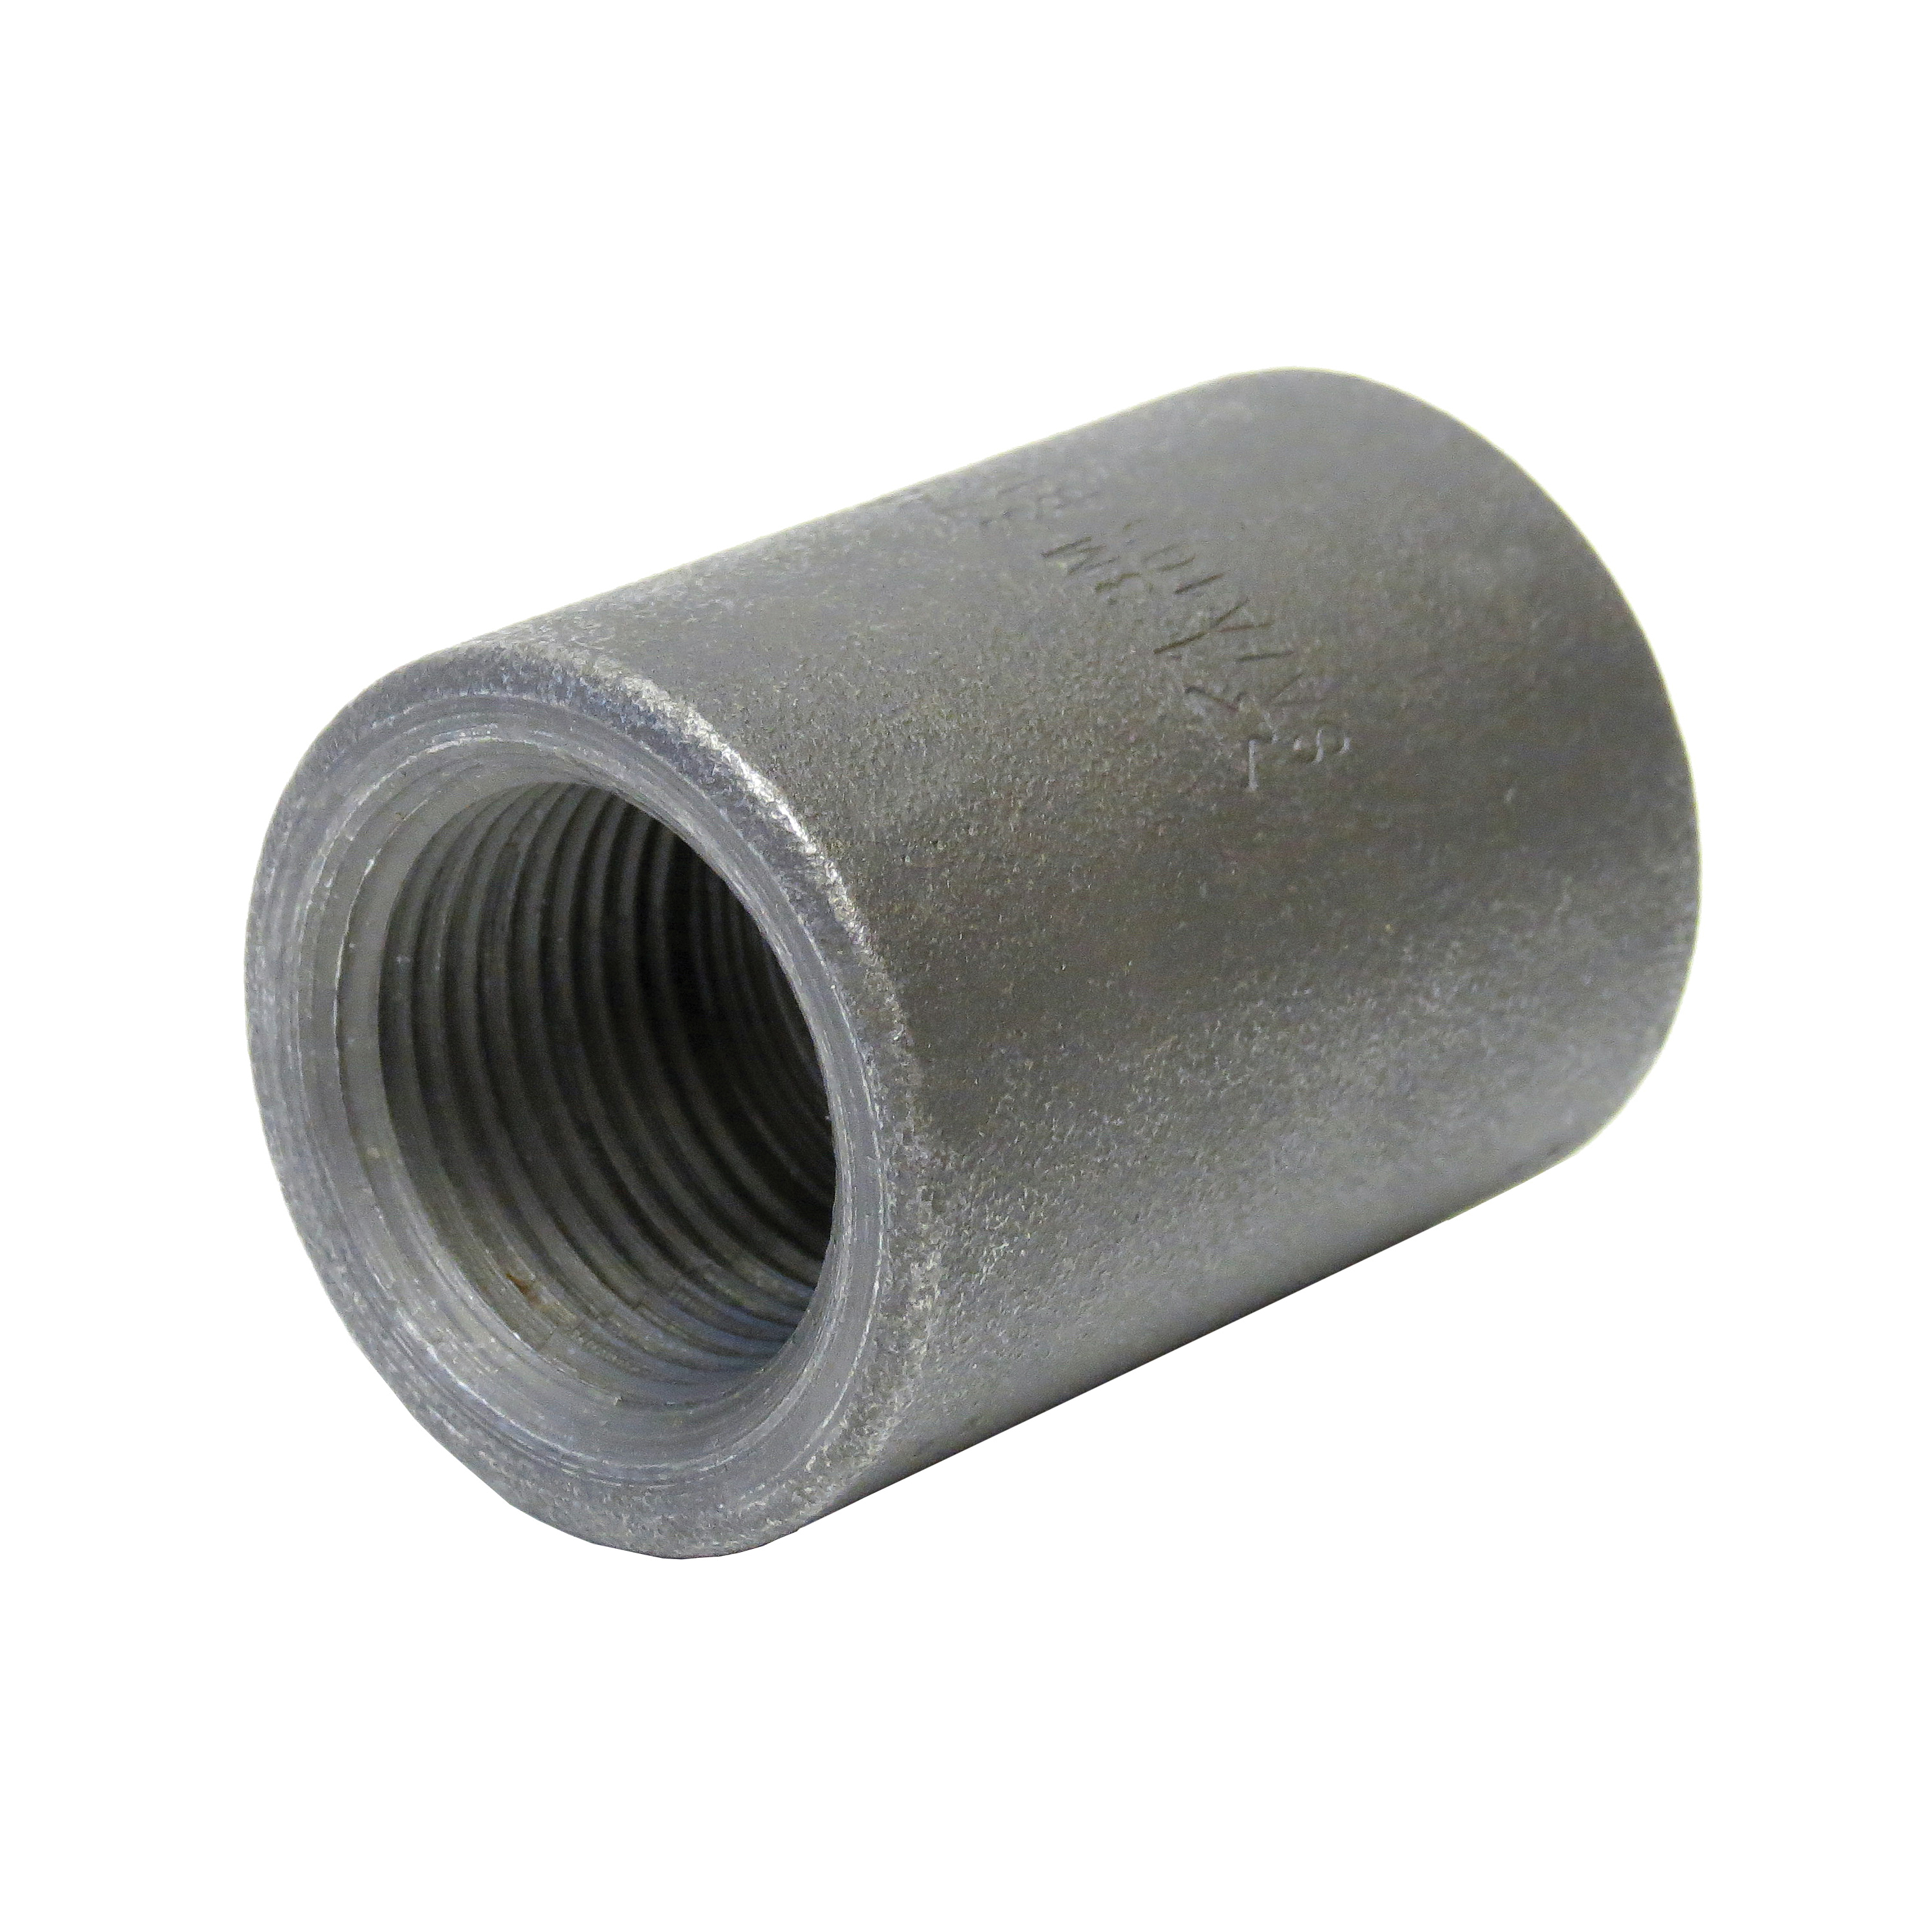 Anvil® 0361155807 FIG 2117 Pipe Coupling, 3/4 in Nominal, FNPT End Style, 3000 lb, Steel, Black Oxide, Domestic